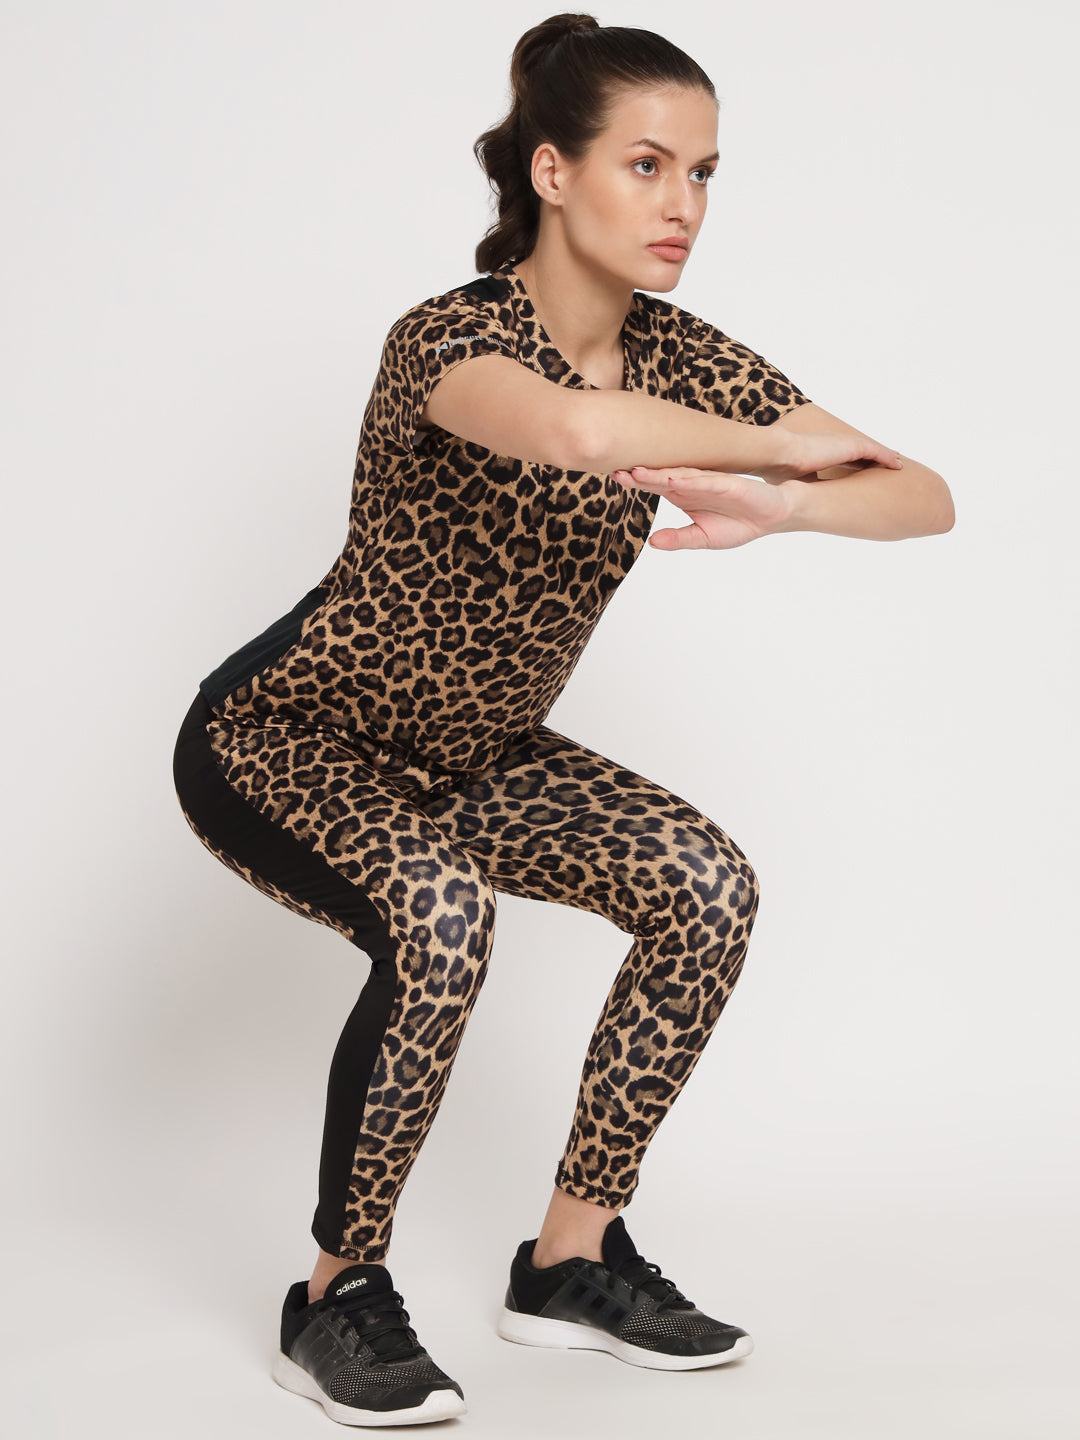 Leopard Print Workout with Mesh Tshirt